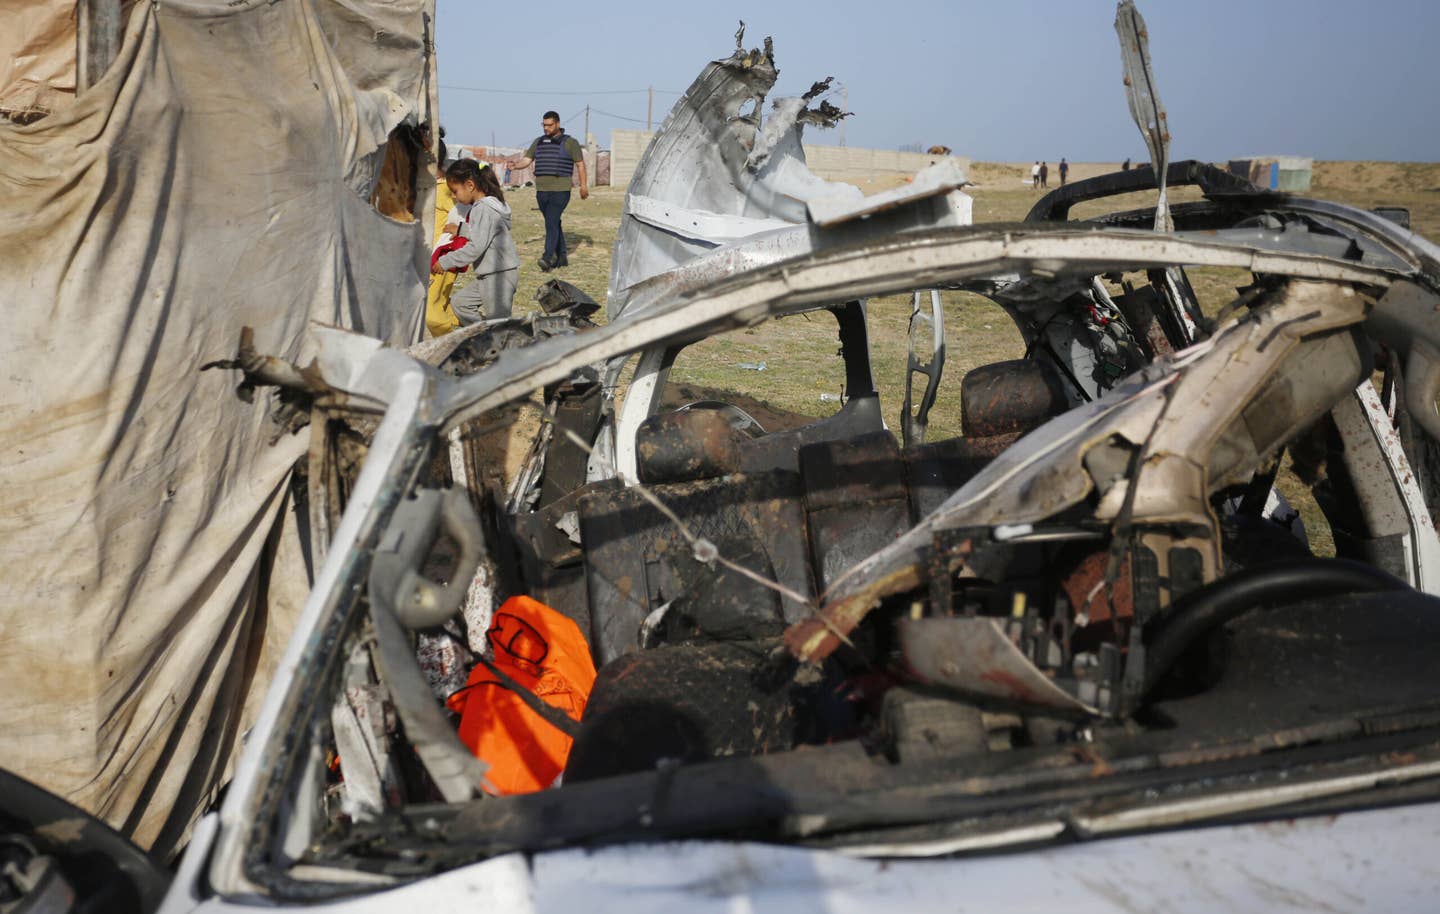 Heavily damaged vehicle belonging to the US-based international volunteer aid organization World Central Kitchen is seen after an Israeli attack that killed seven of the group's aid workers. (Photo by Ashraf Amra/Anadolu via Getty Images)